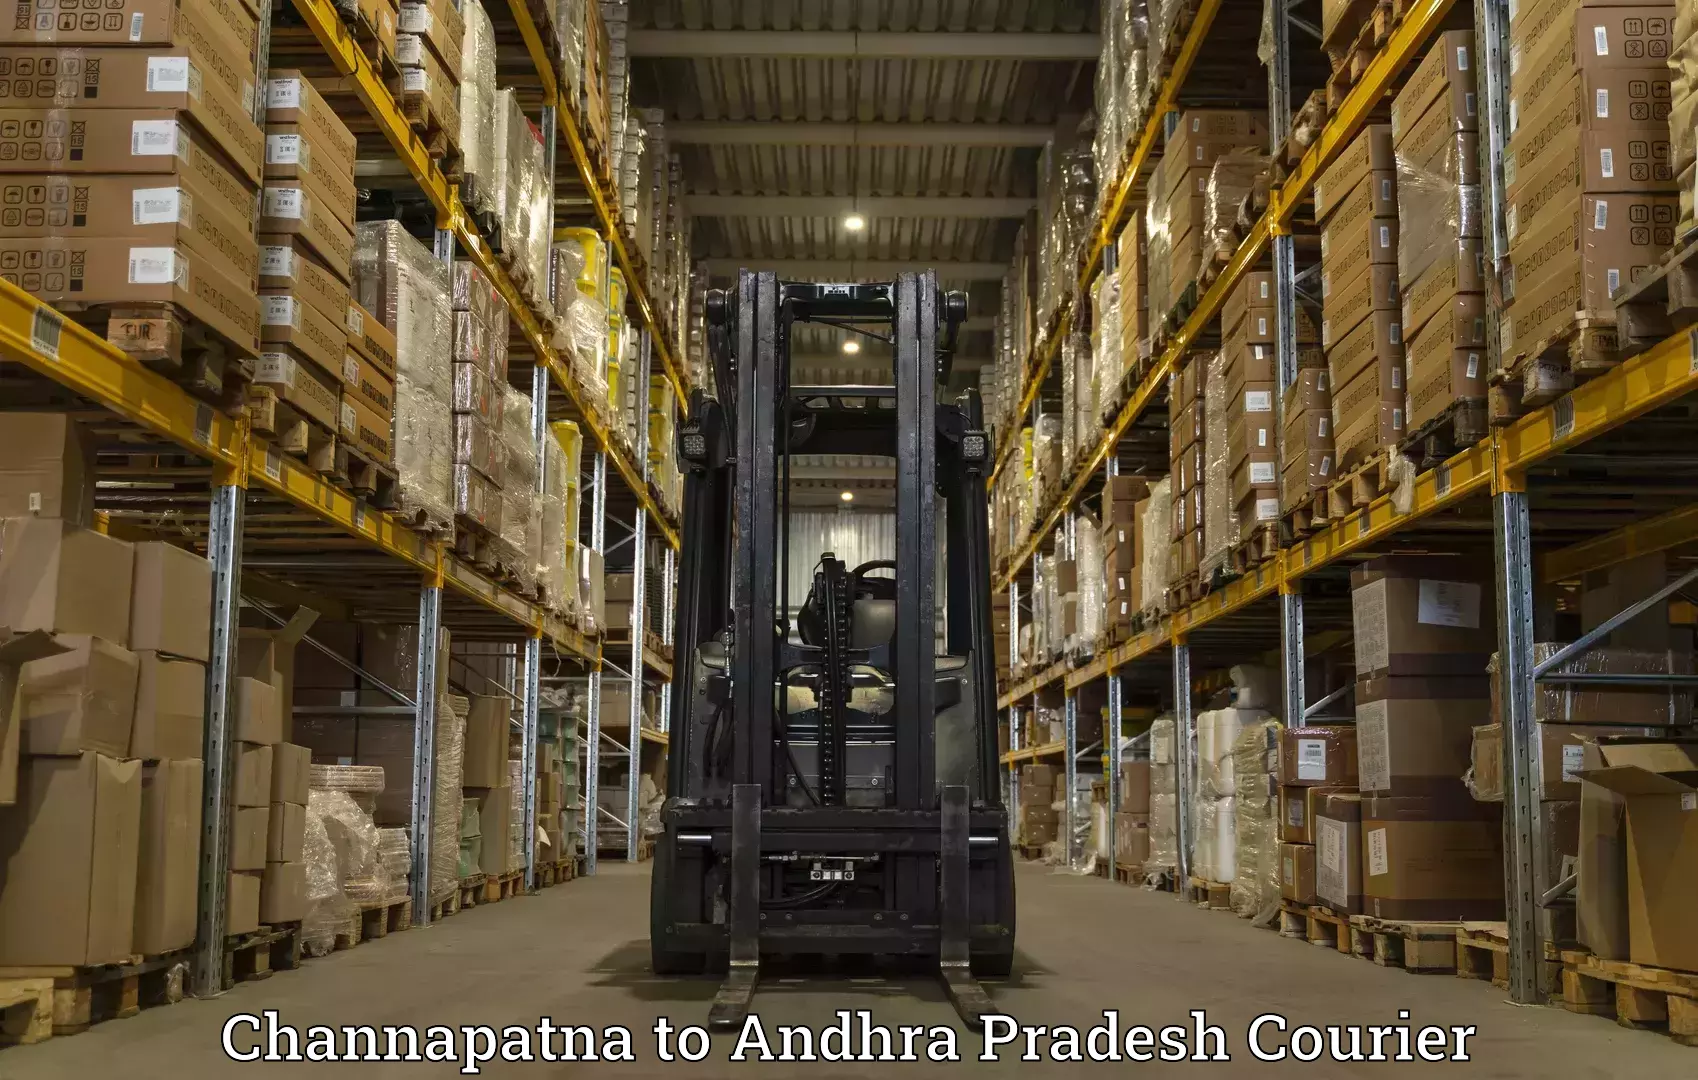 Comprehensive delivery network Channapatna to Visakhapatnam Port